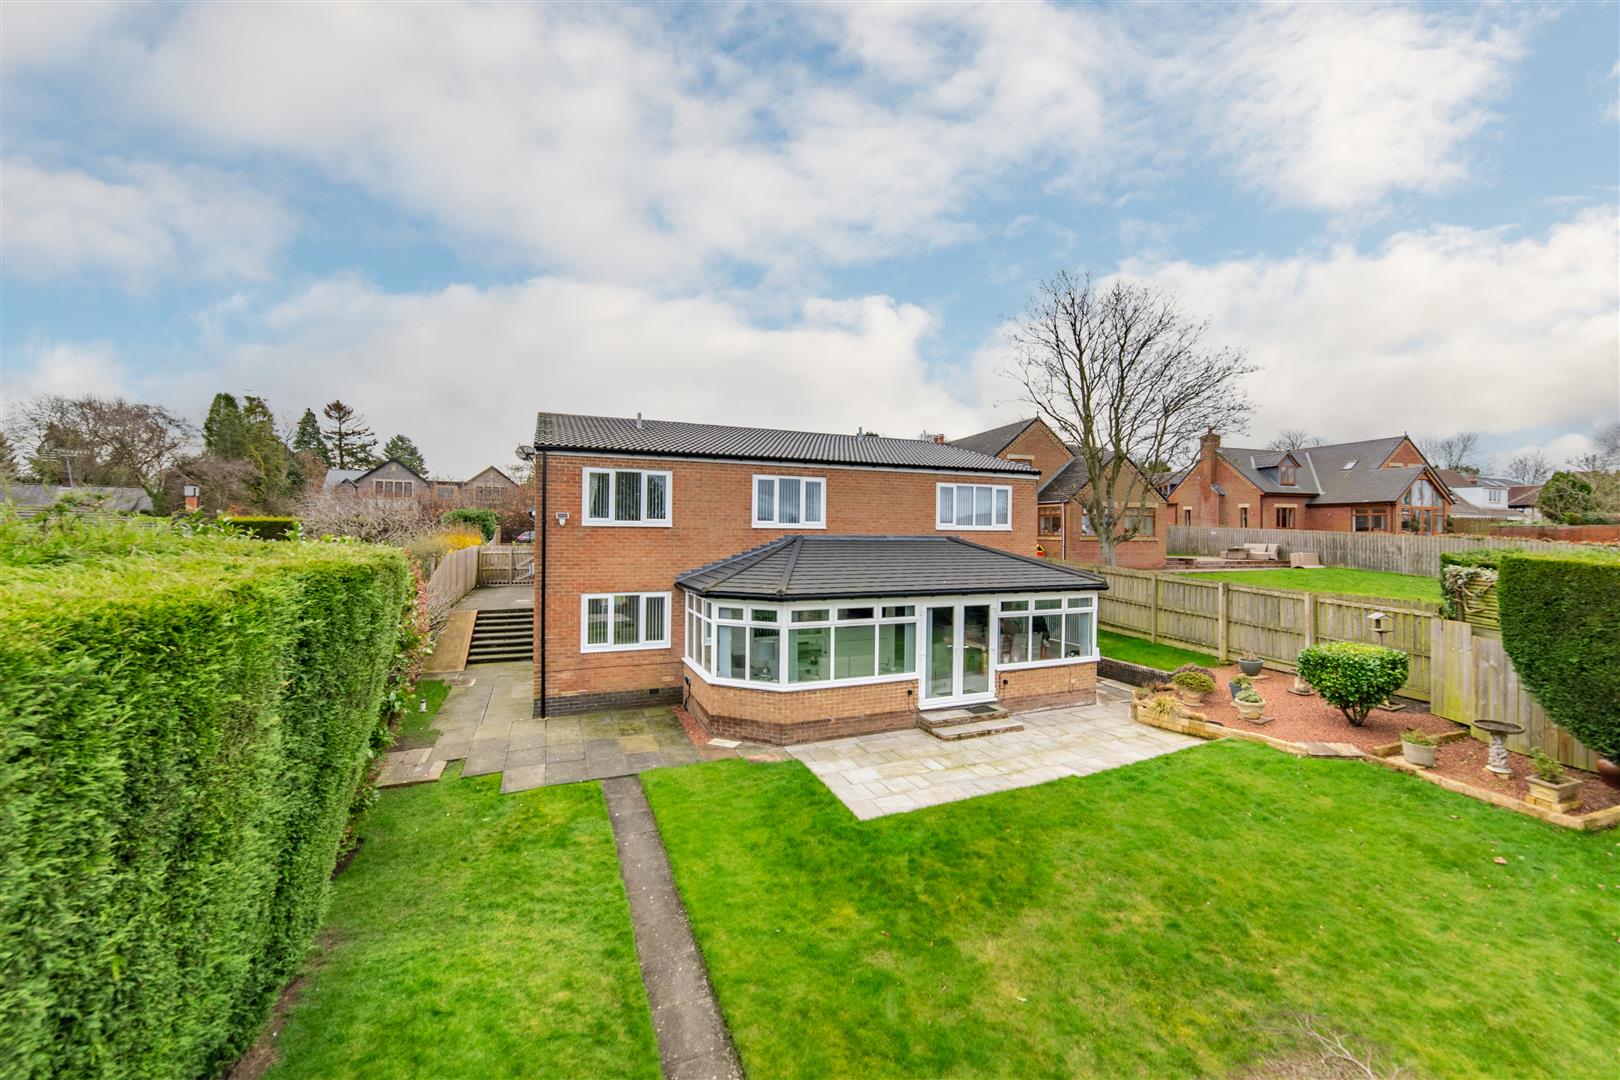 4 bed detached house for sale in Edge Hill, Ponteland - Property Image 1